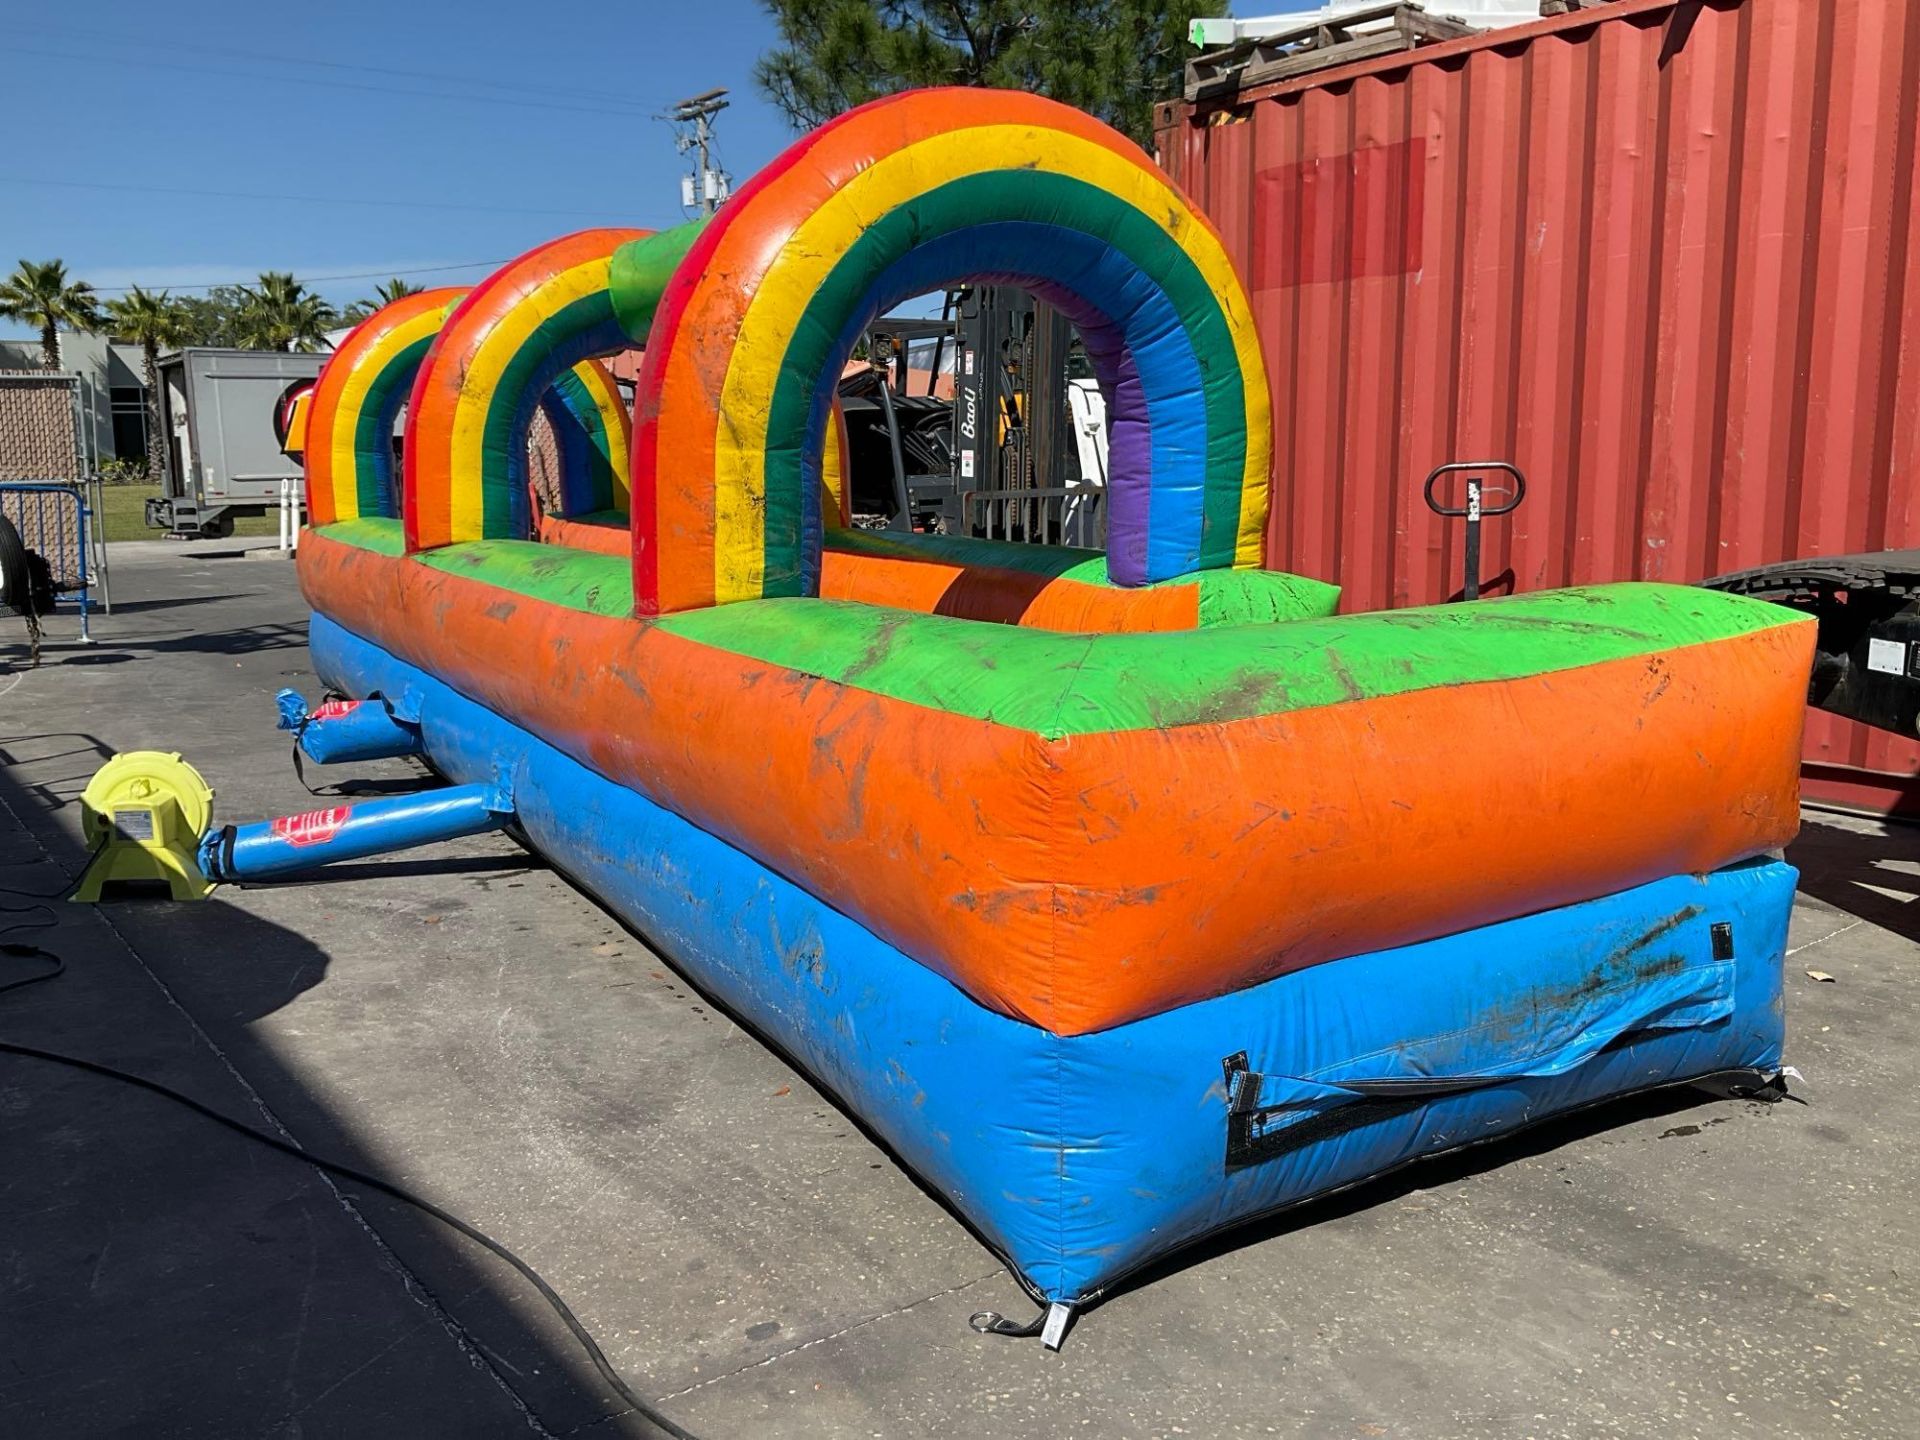 RAINBOW 25FT SLIP -N-SLIDE BOUNCE HOUSE WITH BLOWER - Image 6 of 11